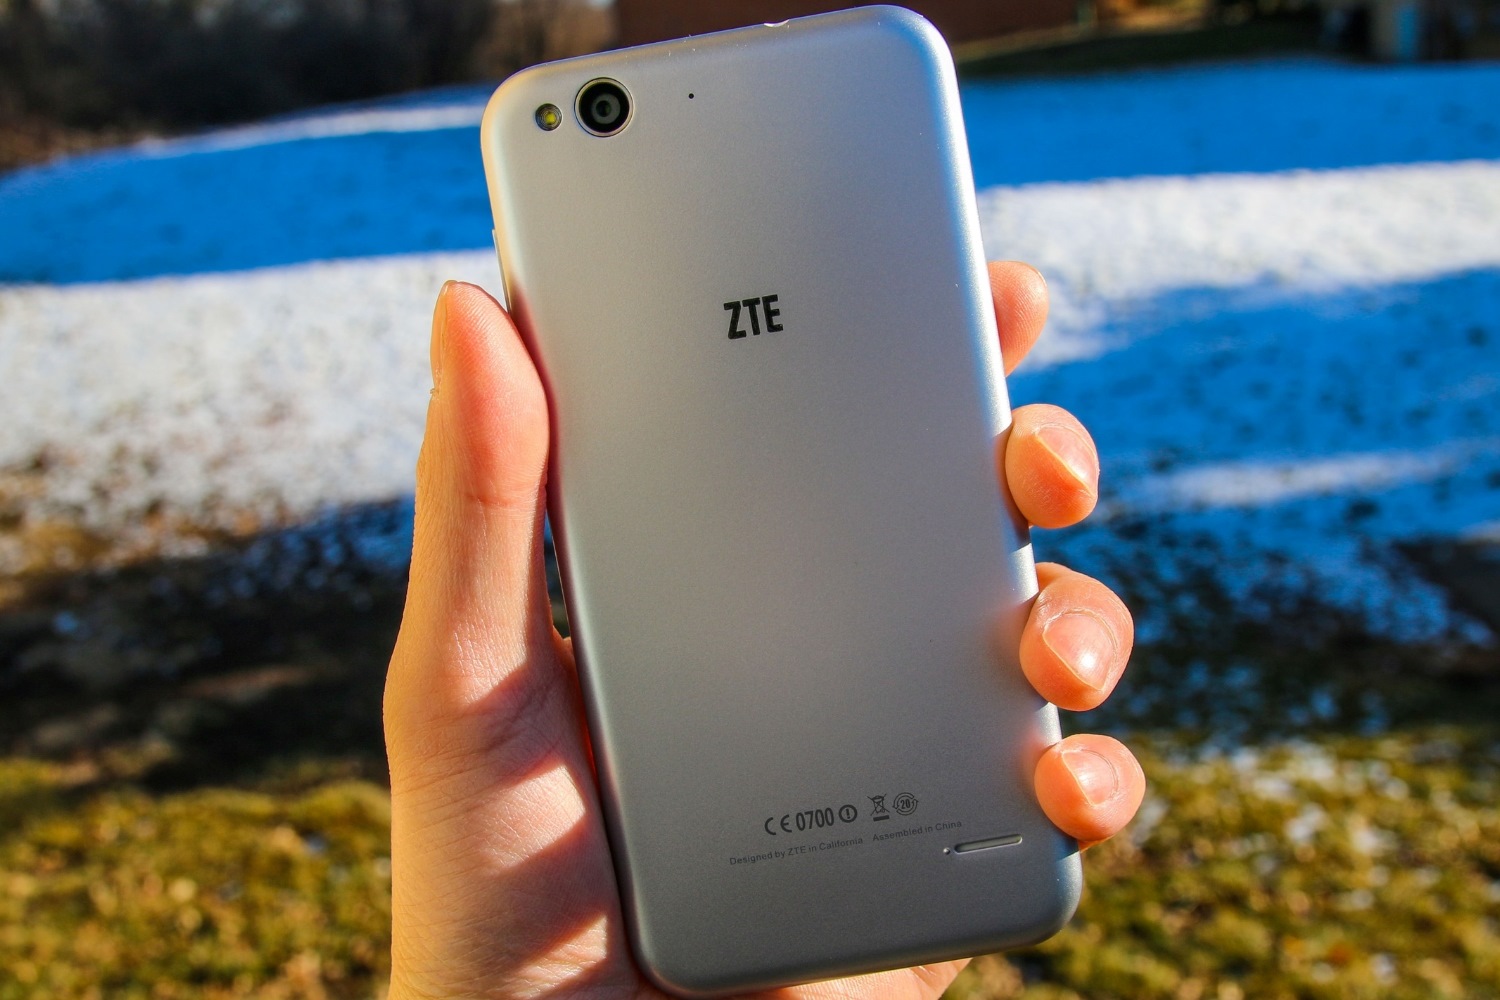 inserting-sim-card-in-zte-phone-step-by-step-guide